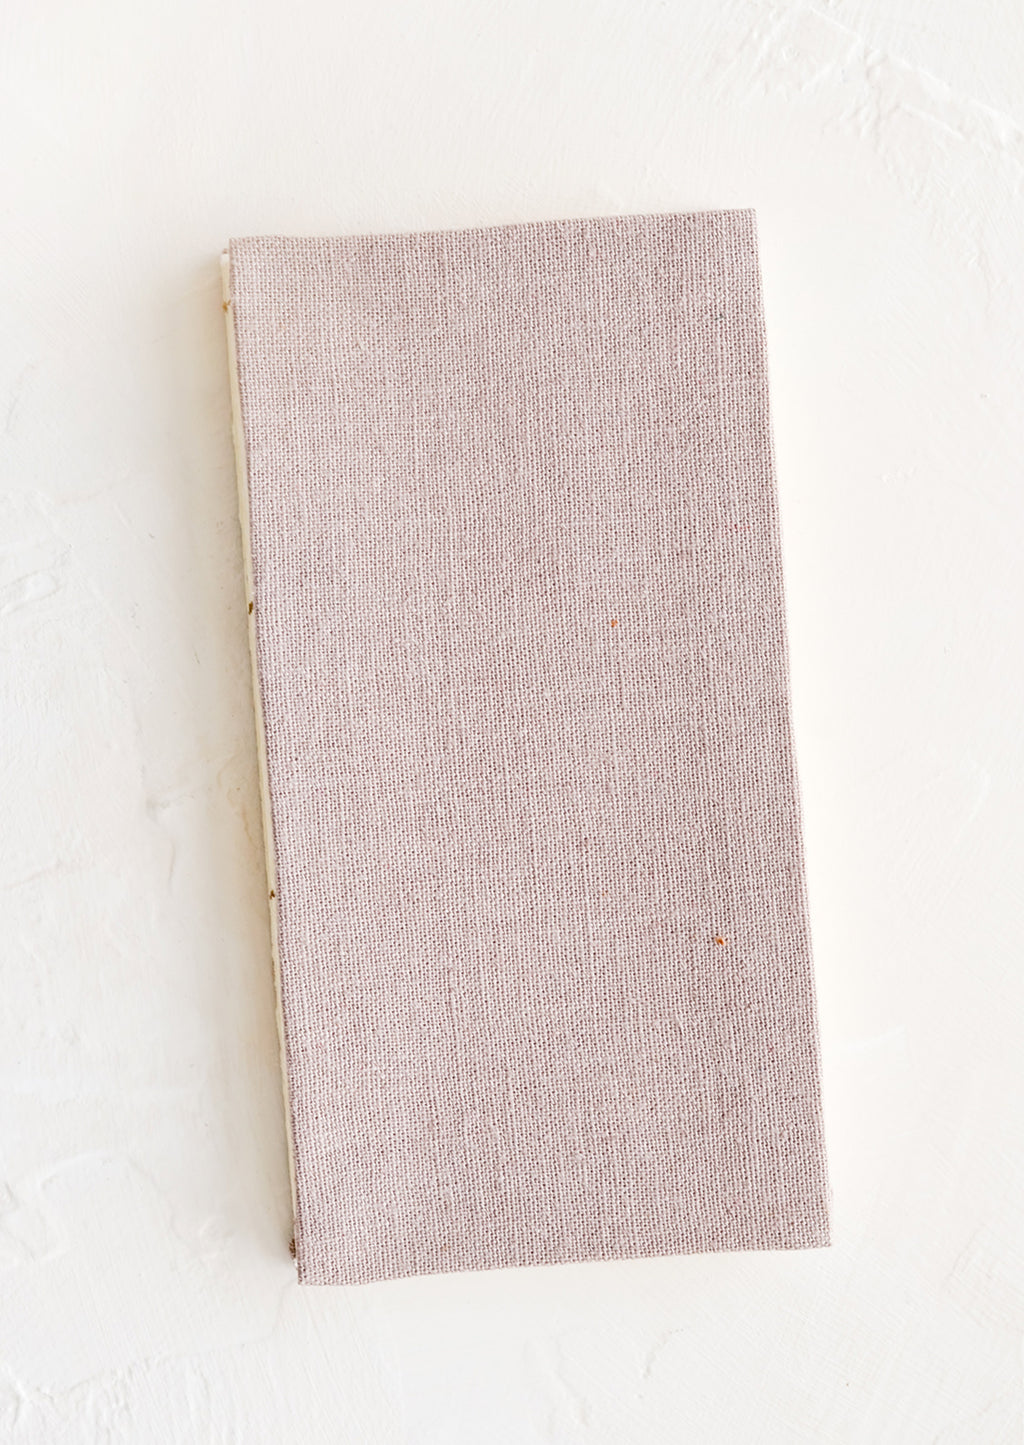 Grey Mauve: A cloth-covered notebook in naturally dyed mauve hue.